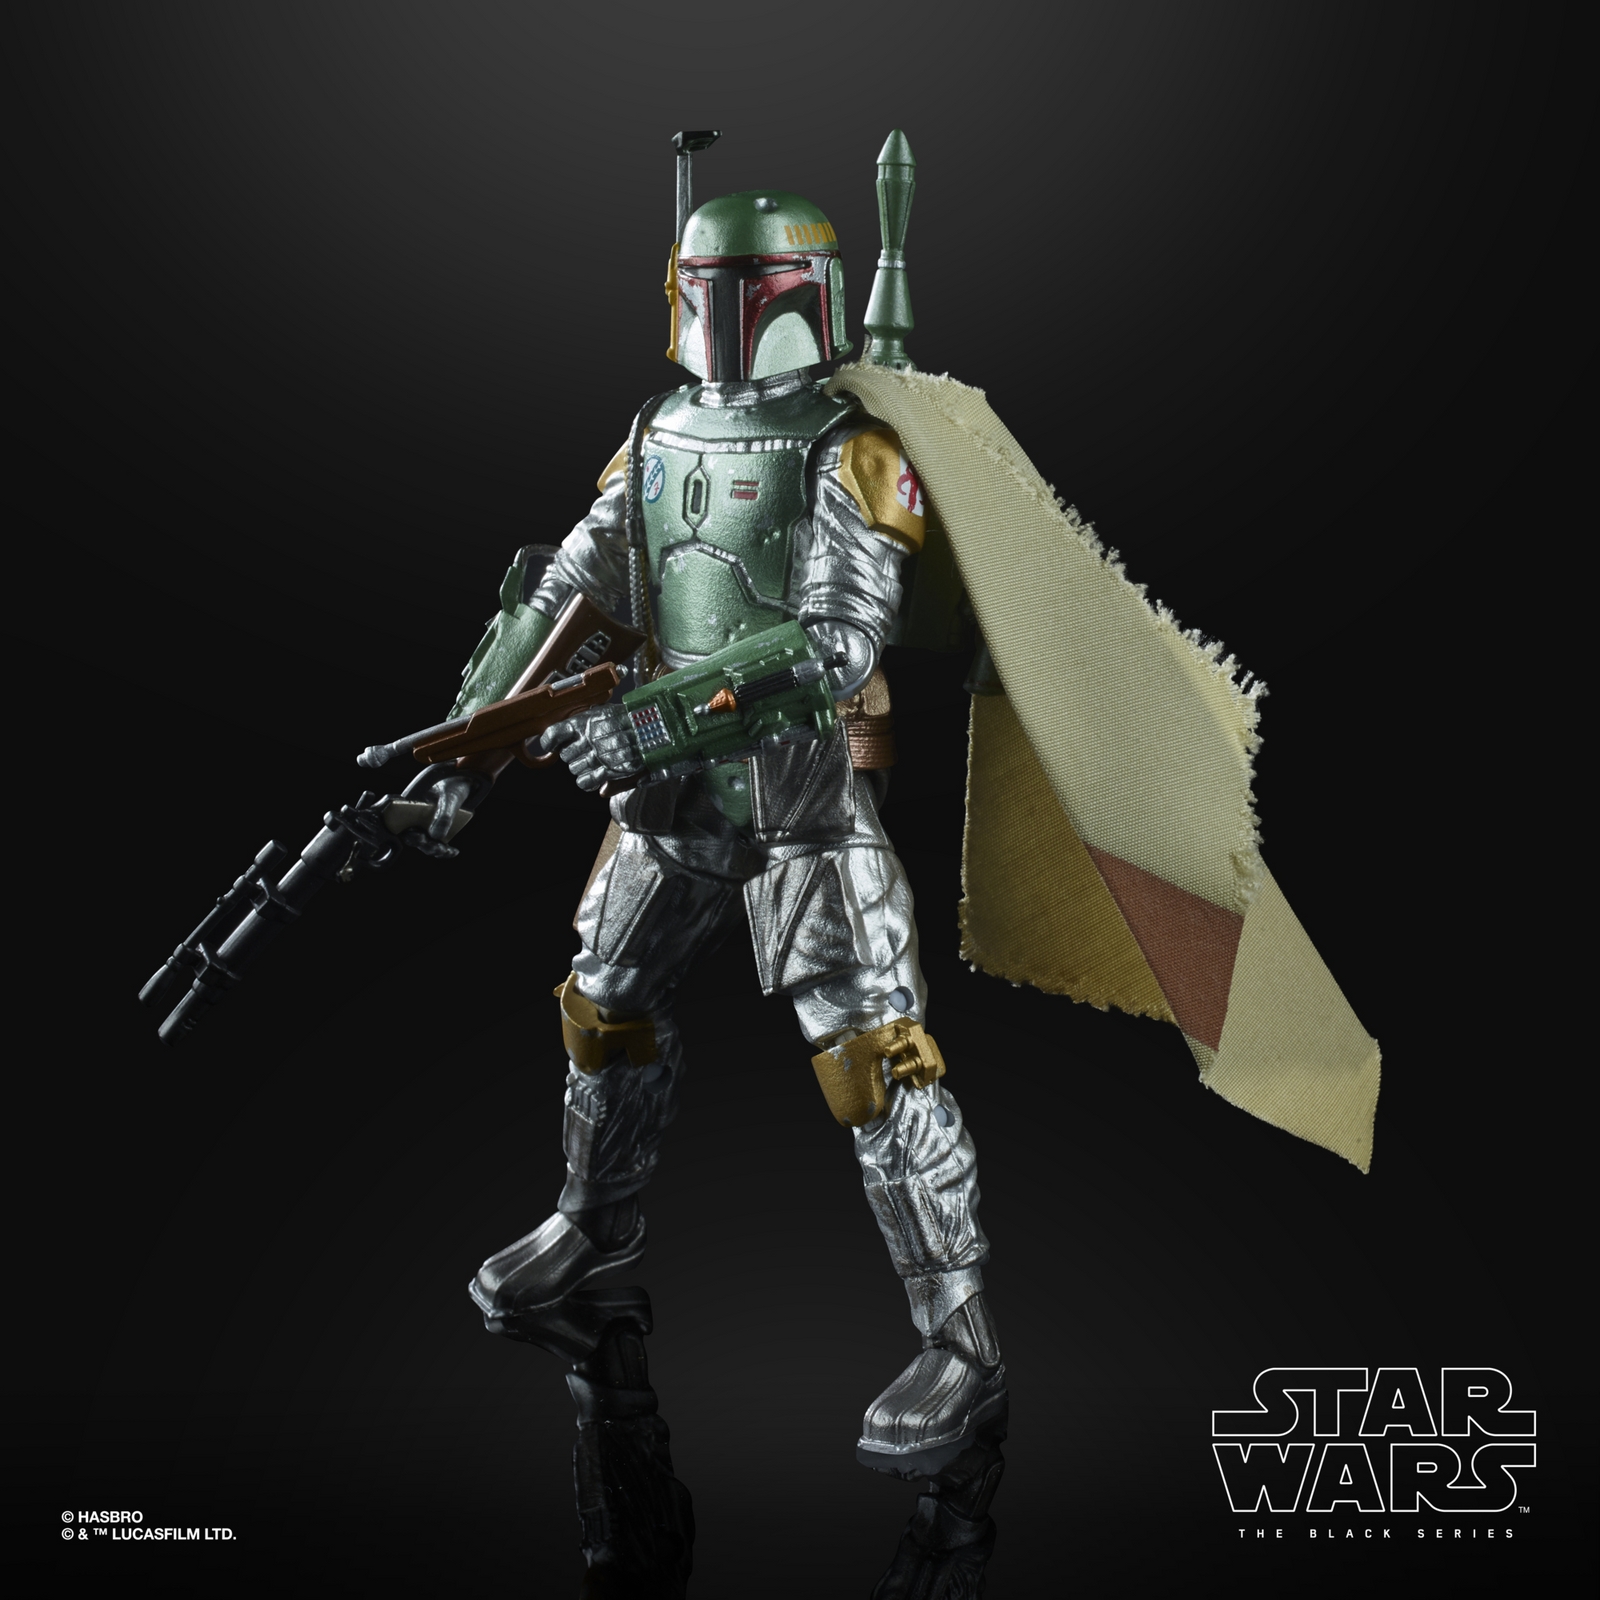 STAR WARS THE BLACK CARBONIZED COLLECTION 6-INCH BOBA FETT Figure - oop (2).jpg